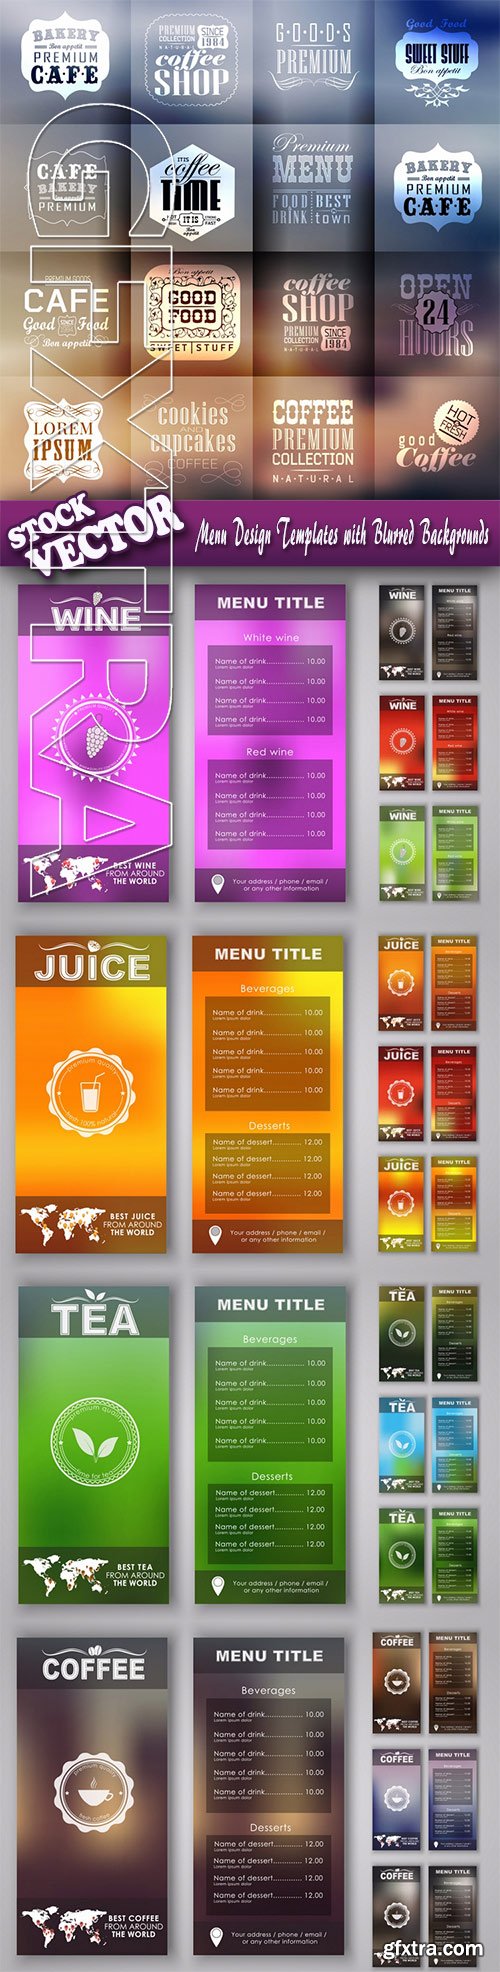 Stock Vector - Menu Design Templates with Blurred Backgrounds